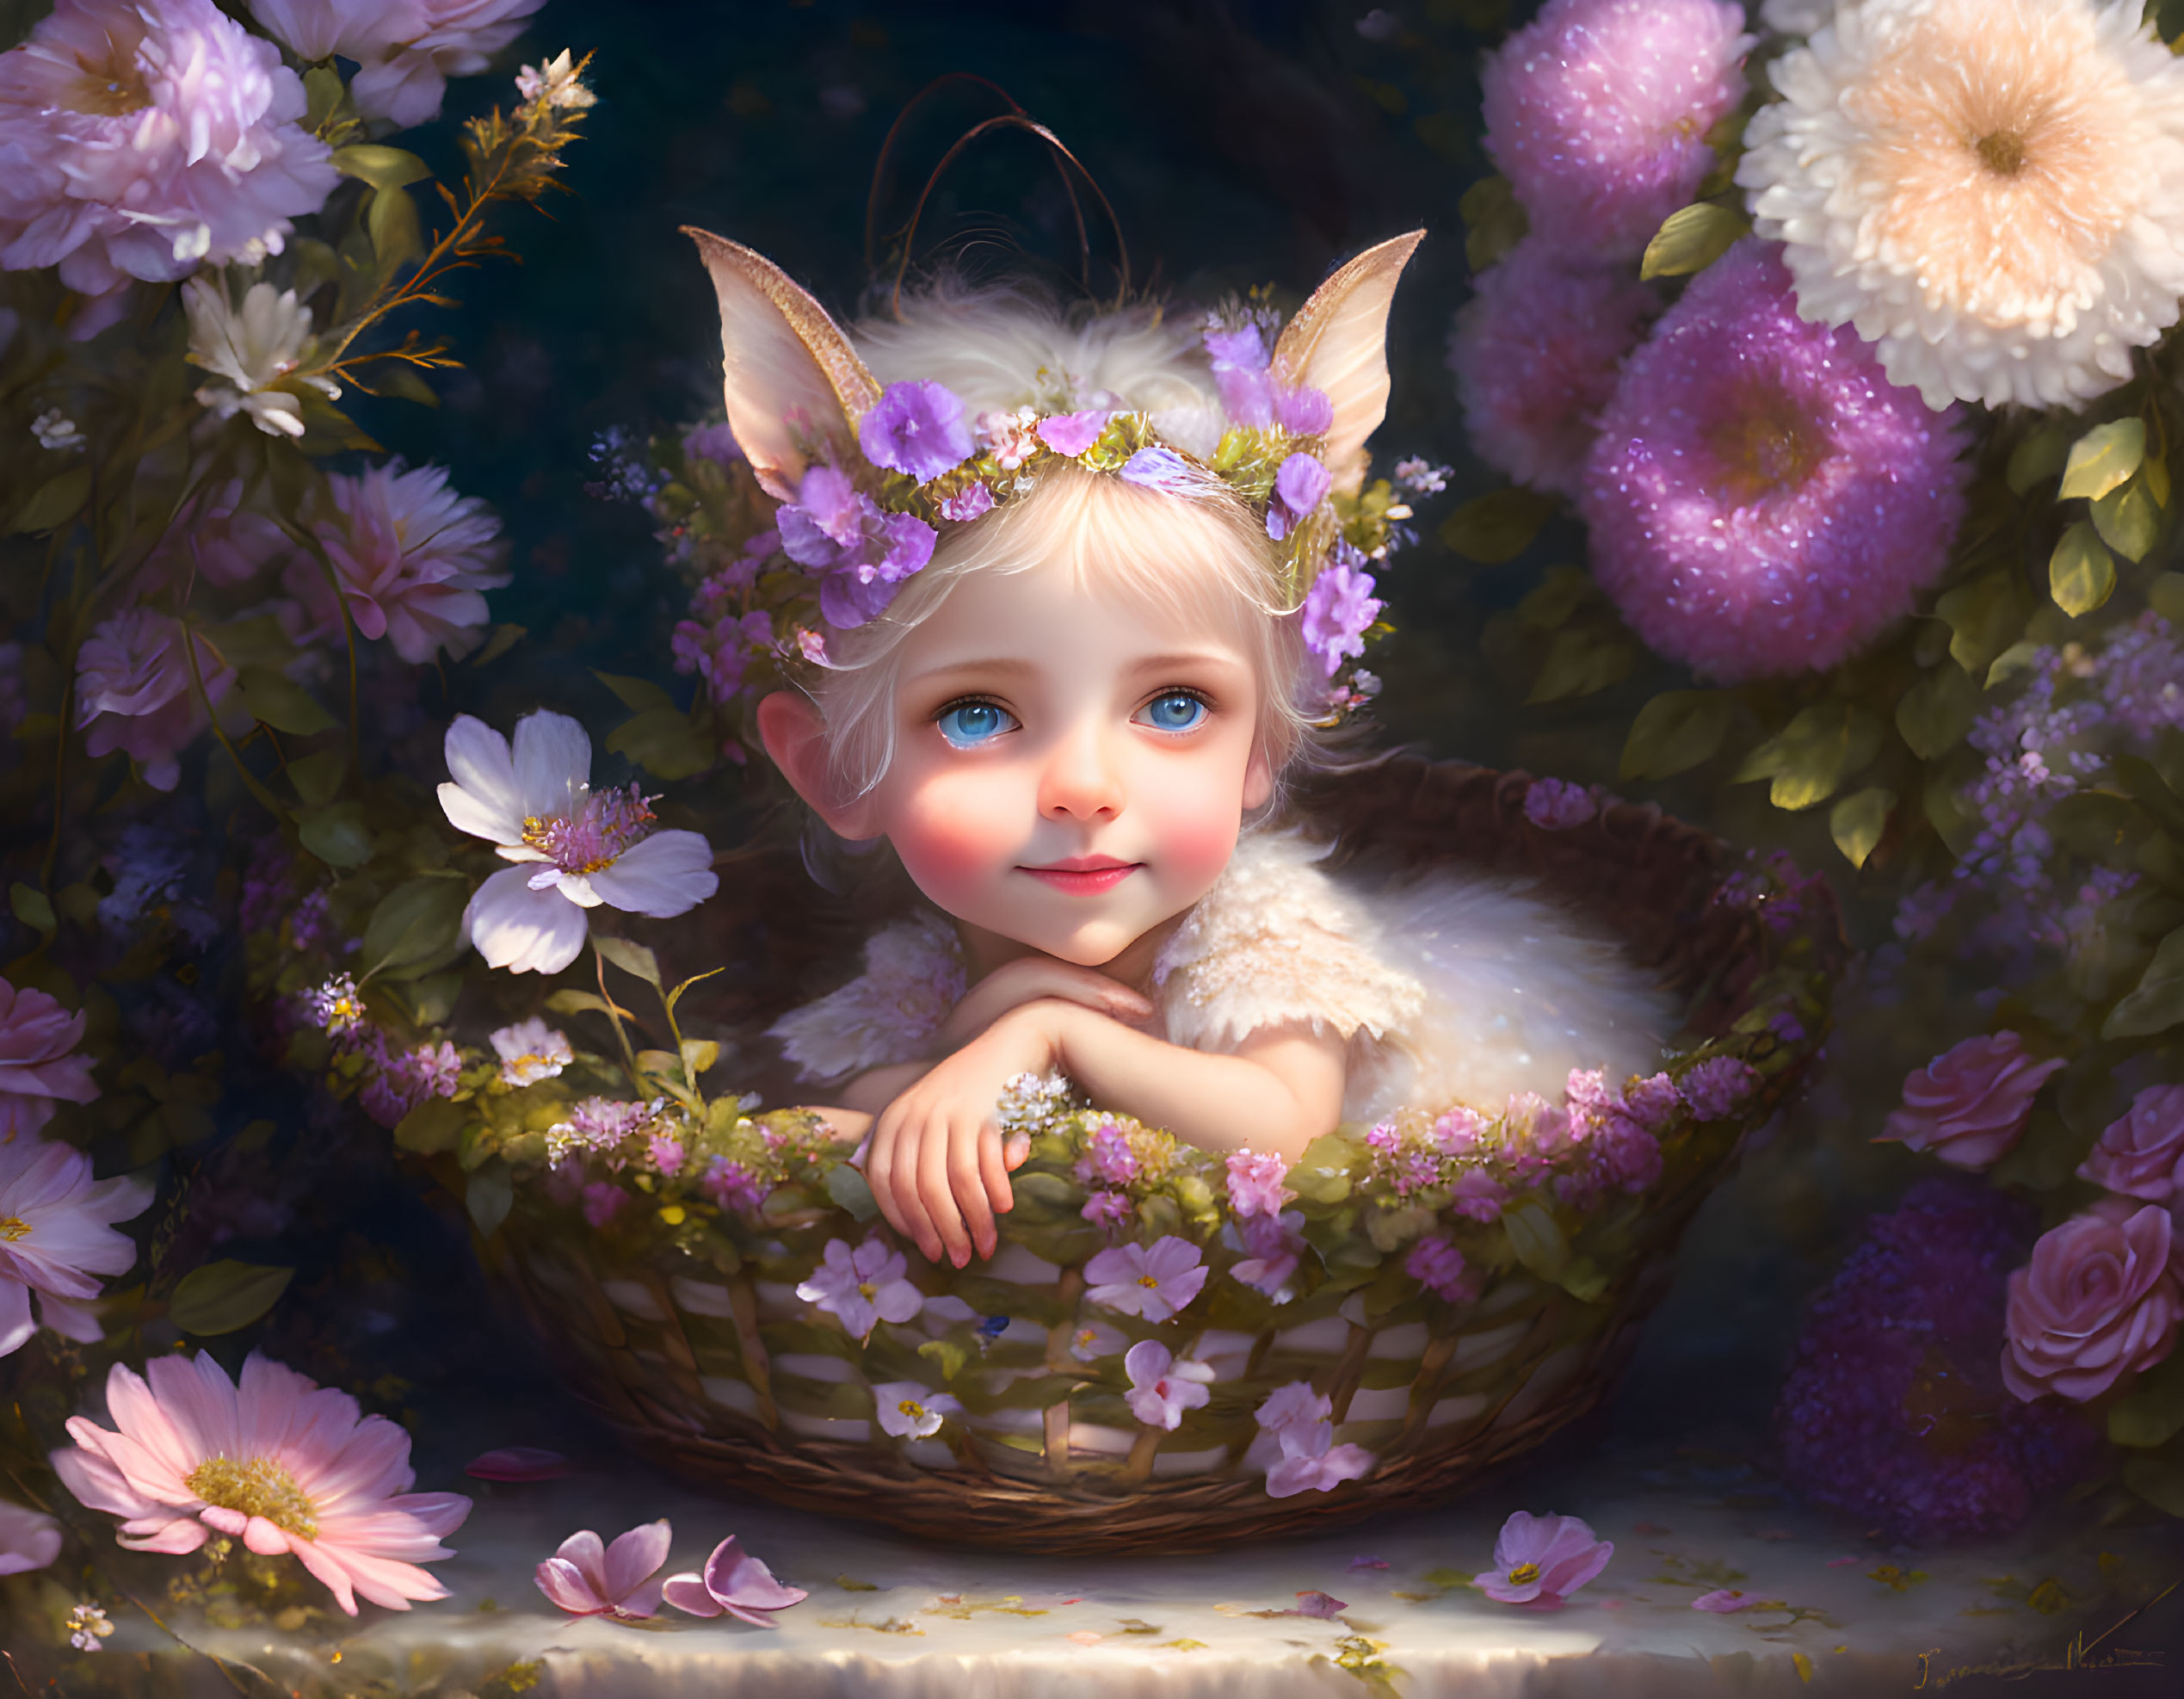 Child with Pointed Ears in Floral Wreath, Surrounded by Flowers